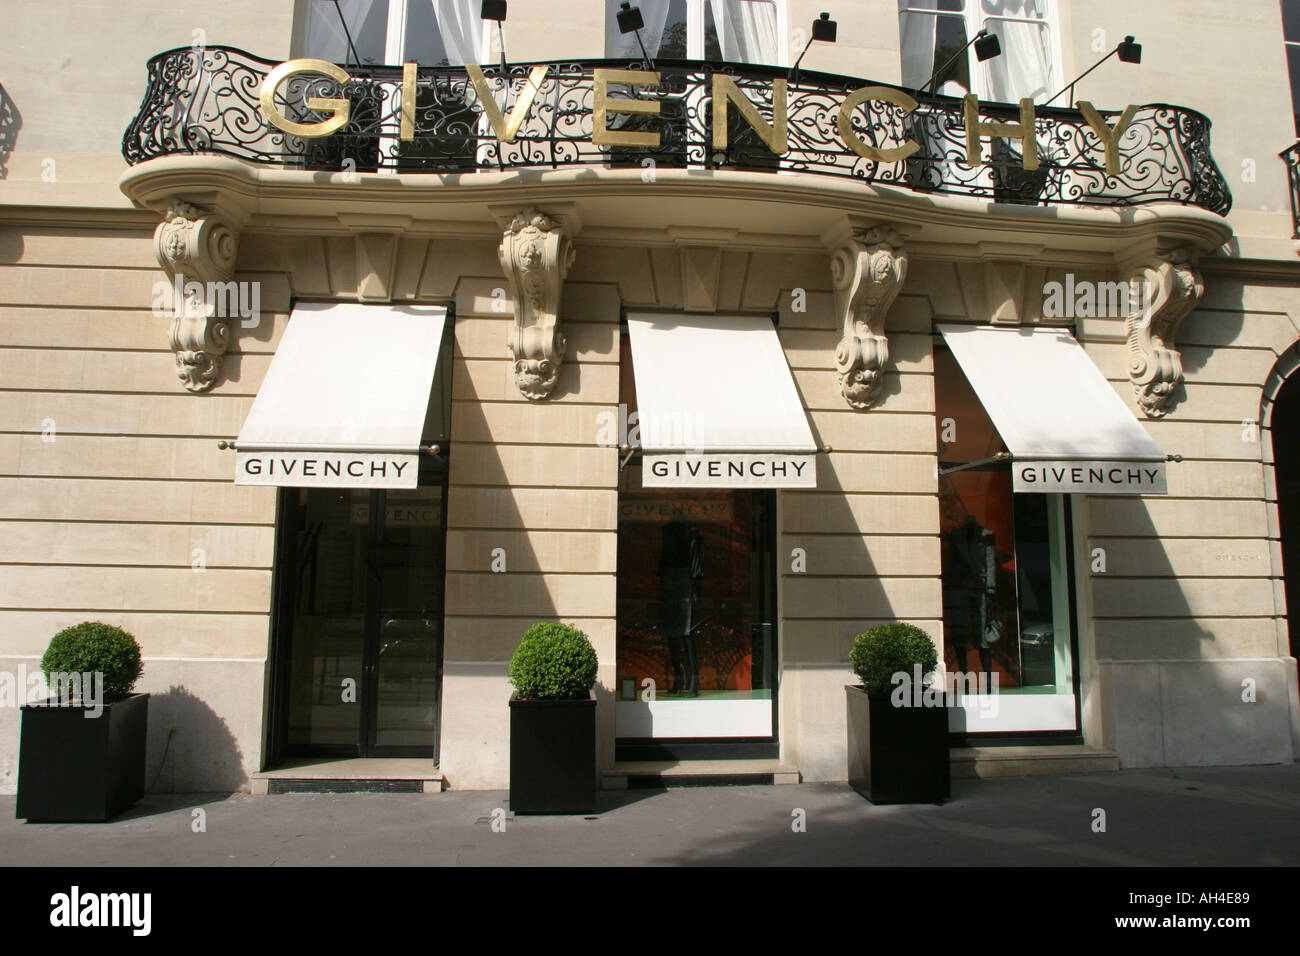 PARIS - JULY 20: Givenchy Company Headquarters And Store On July